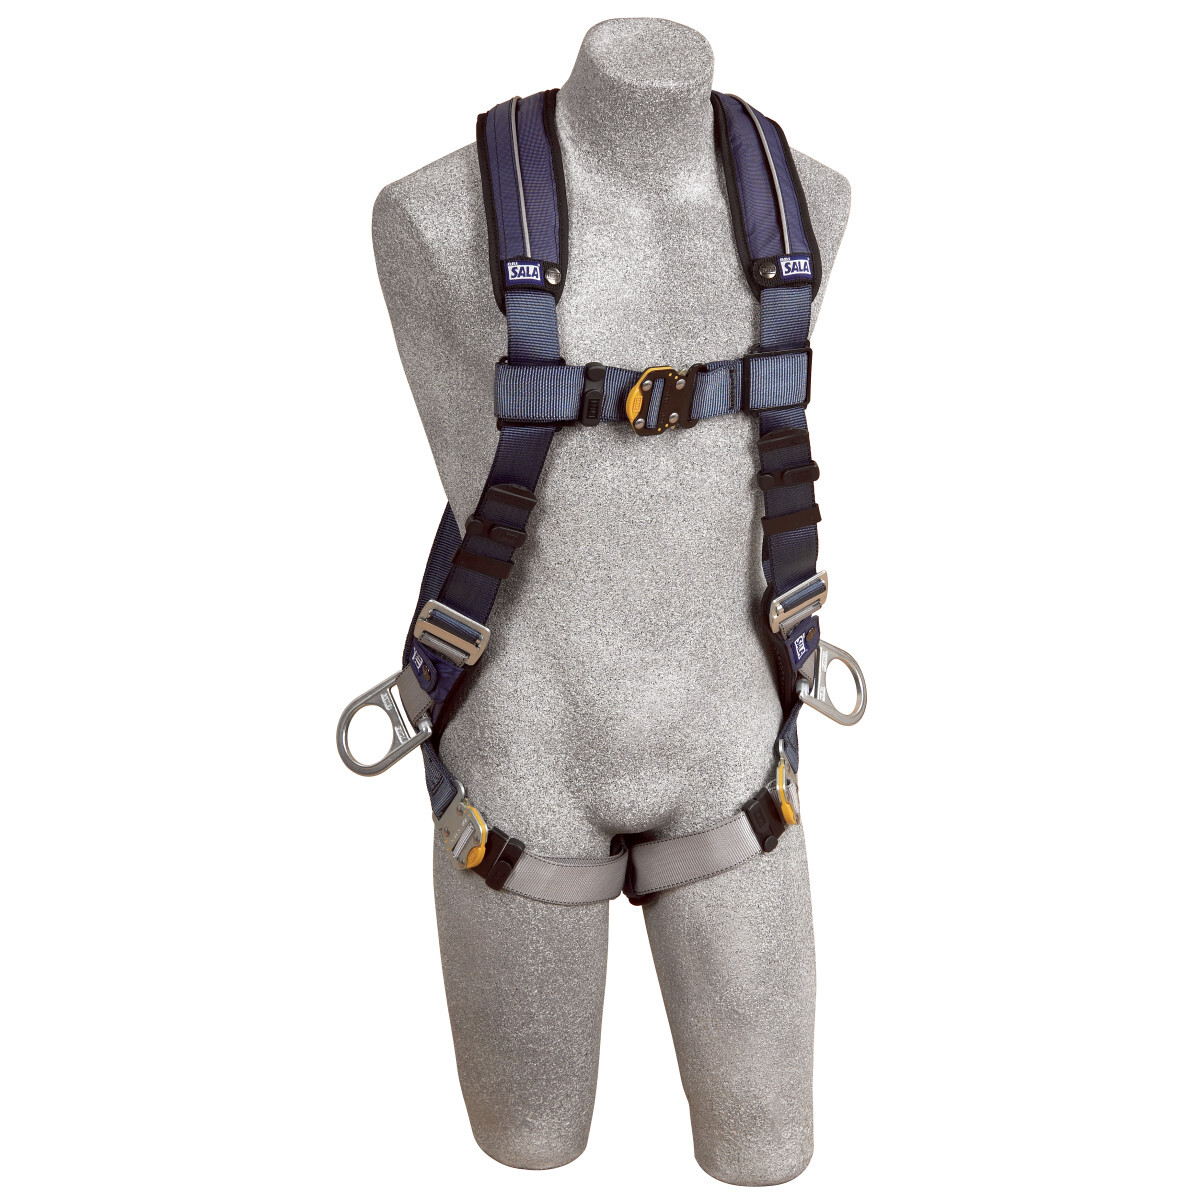 3M™ DBI-SALA® Large ExoFit™ XP Full Body/Vest Style Harness With Back And Side D-Ring, Quick Connect Chest And Leg Strap Buckle